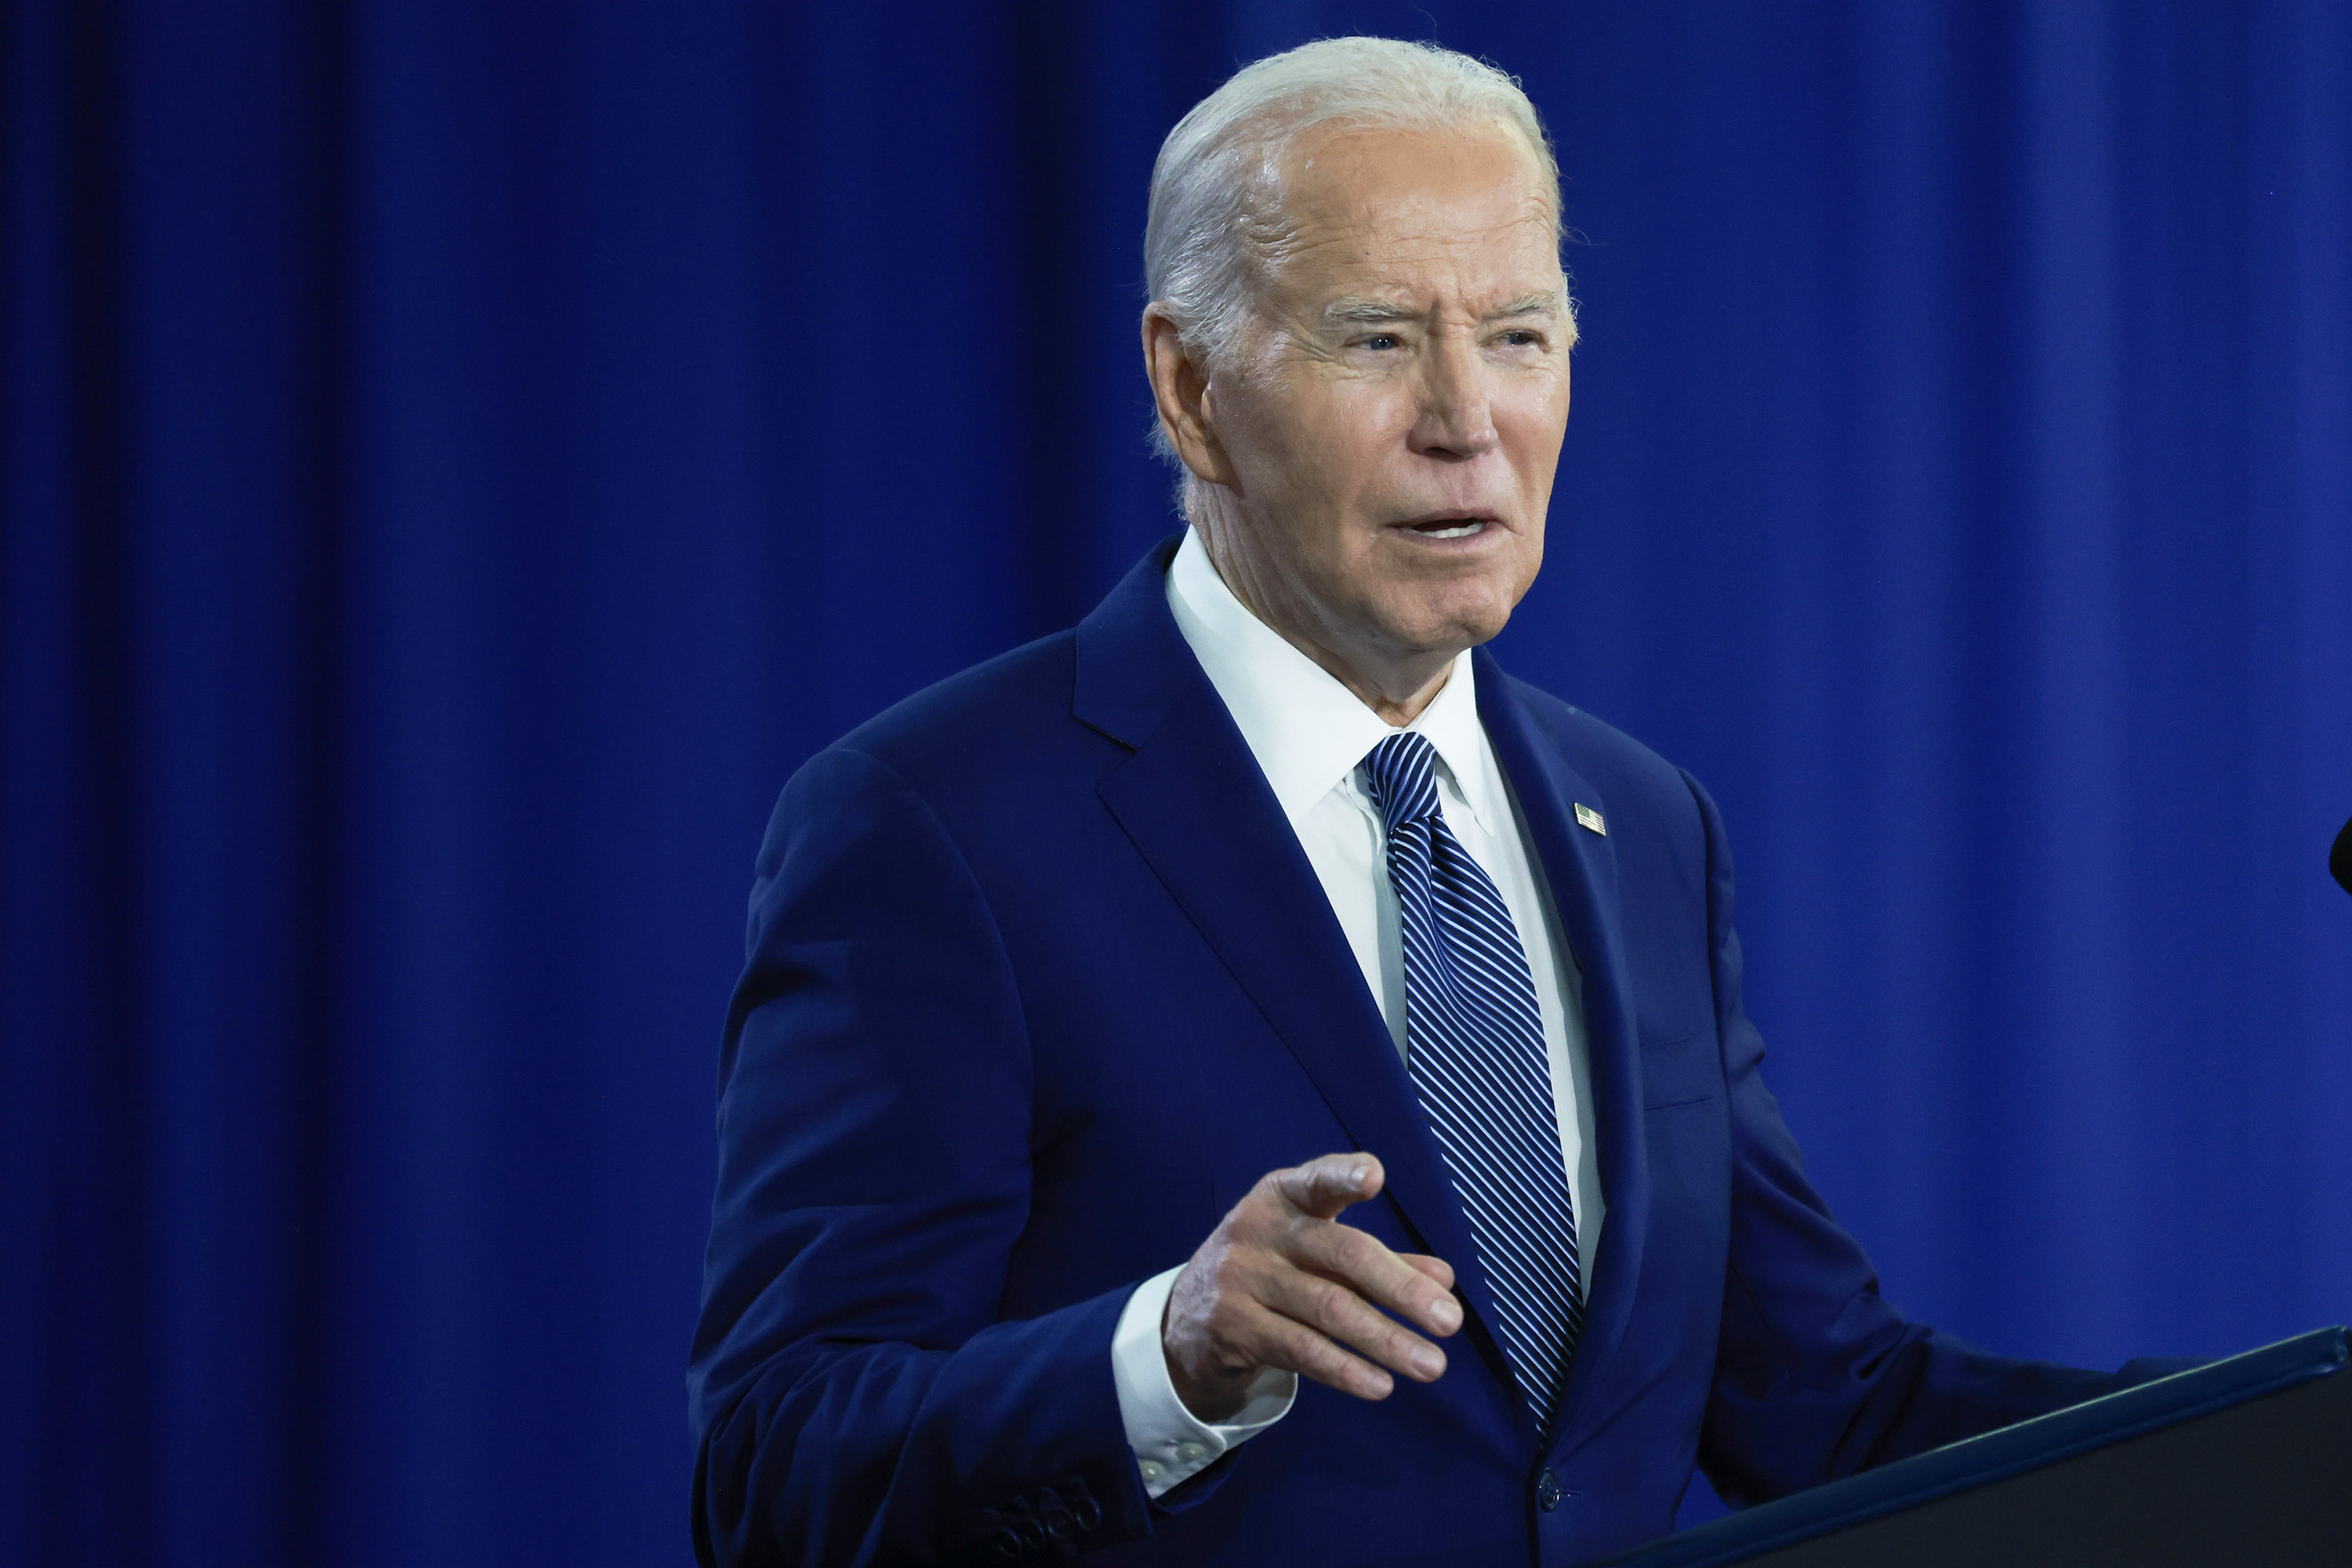 President Joe Biden speaks during a campaign stop on April 23, in Tampa, Florida.